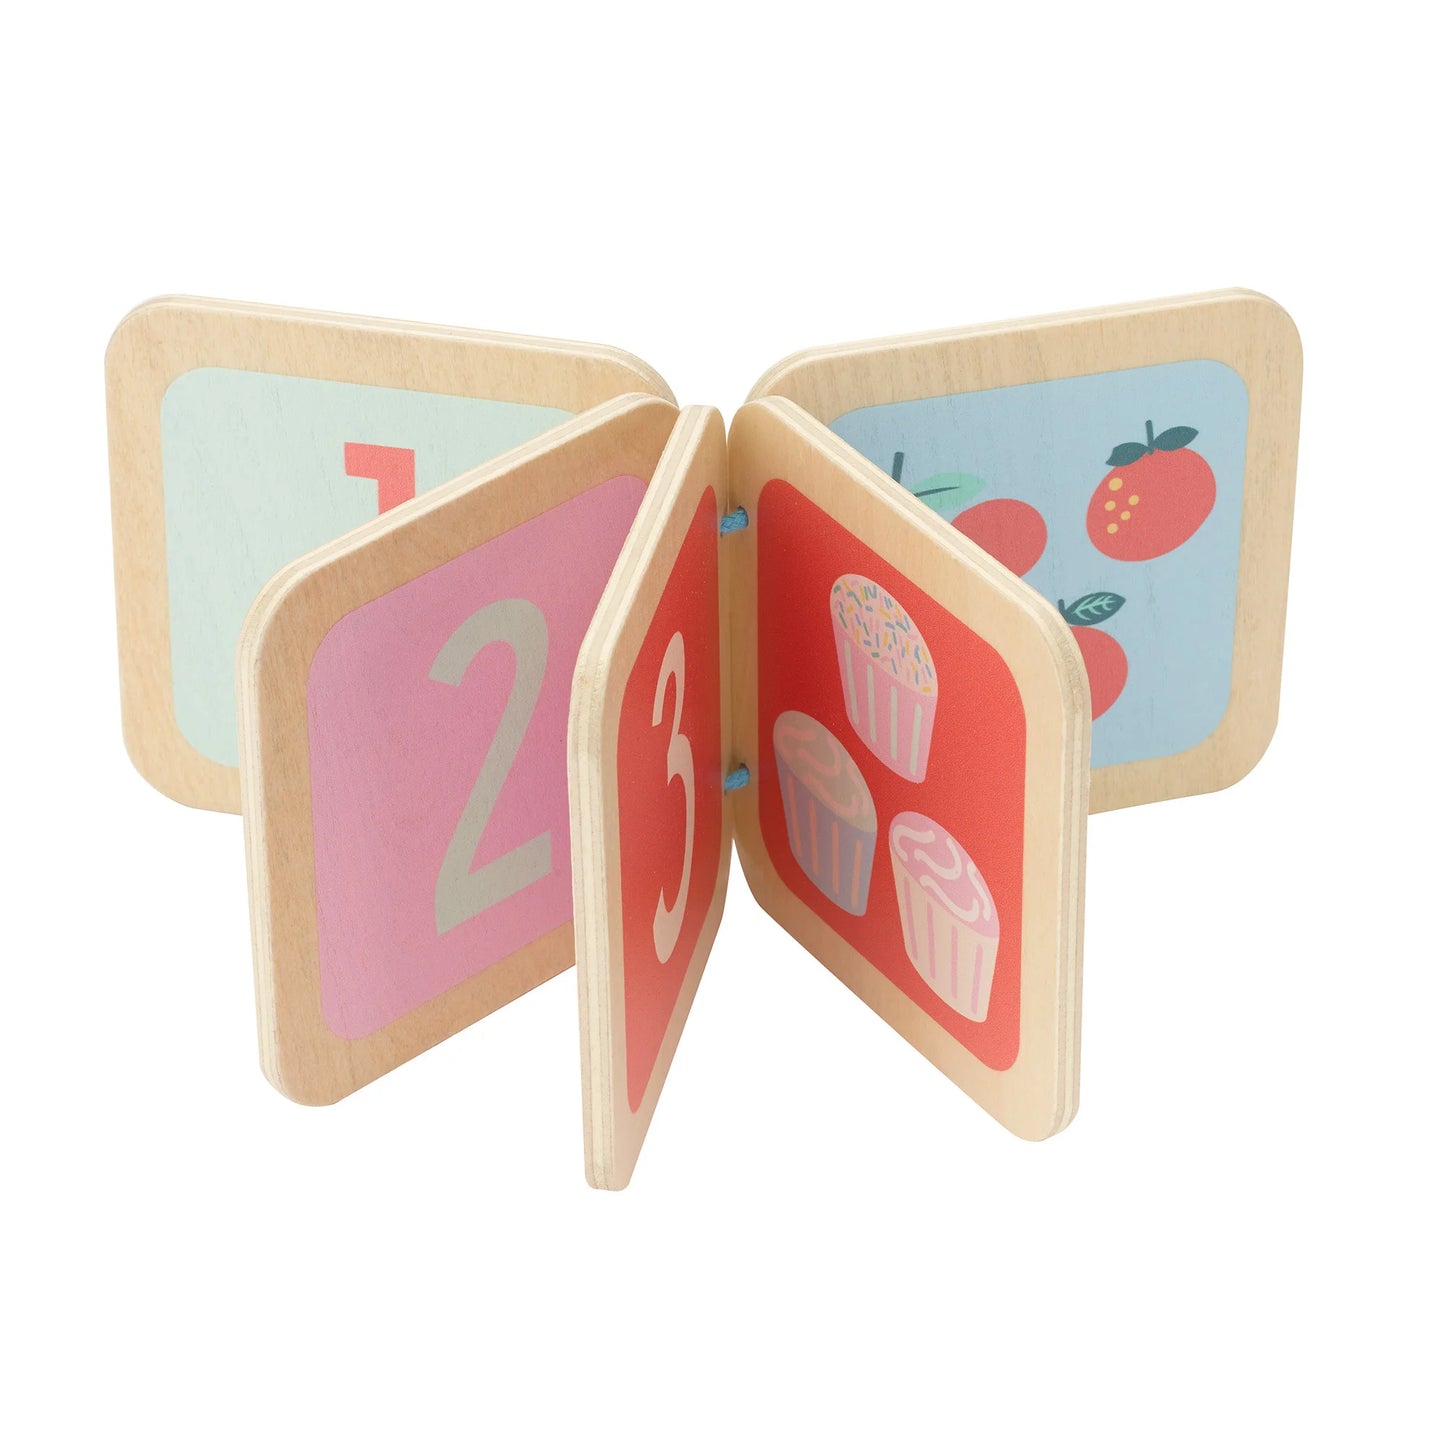 Paddington Wooden Counting Cards